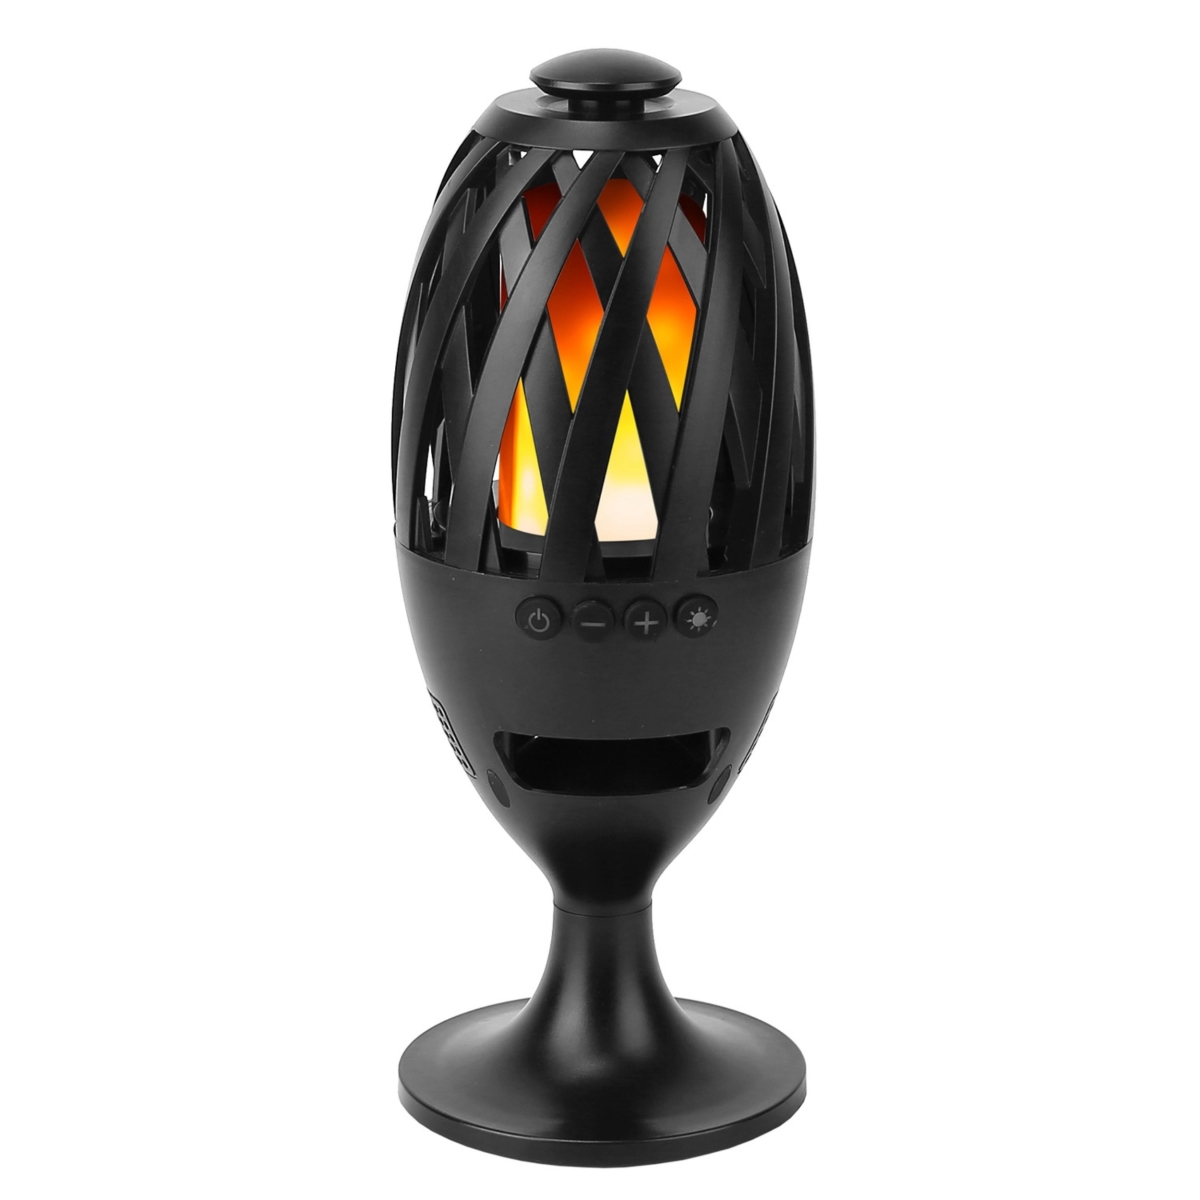 FFF-GPCT2279 Waterproof LED Flame Speakers - Stereo Bass, Wireless, Outdoor Light-Up, Atmosphere LED Flickers, Patio Stake